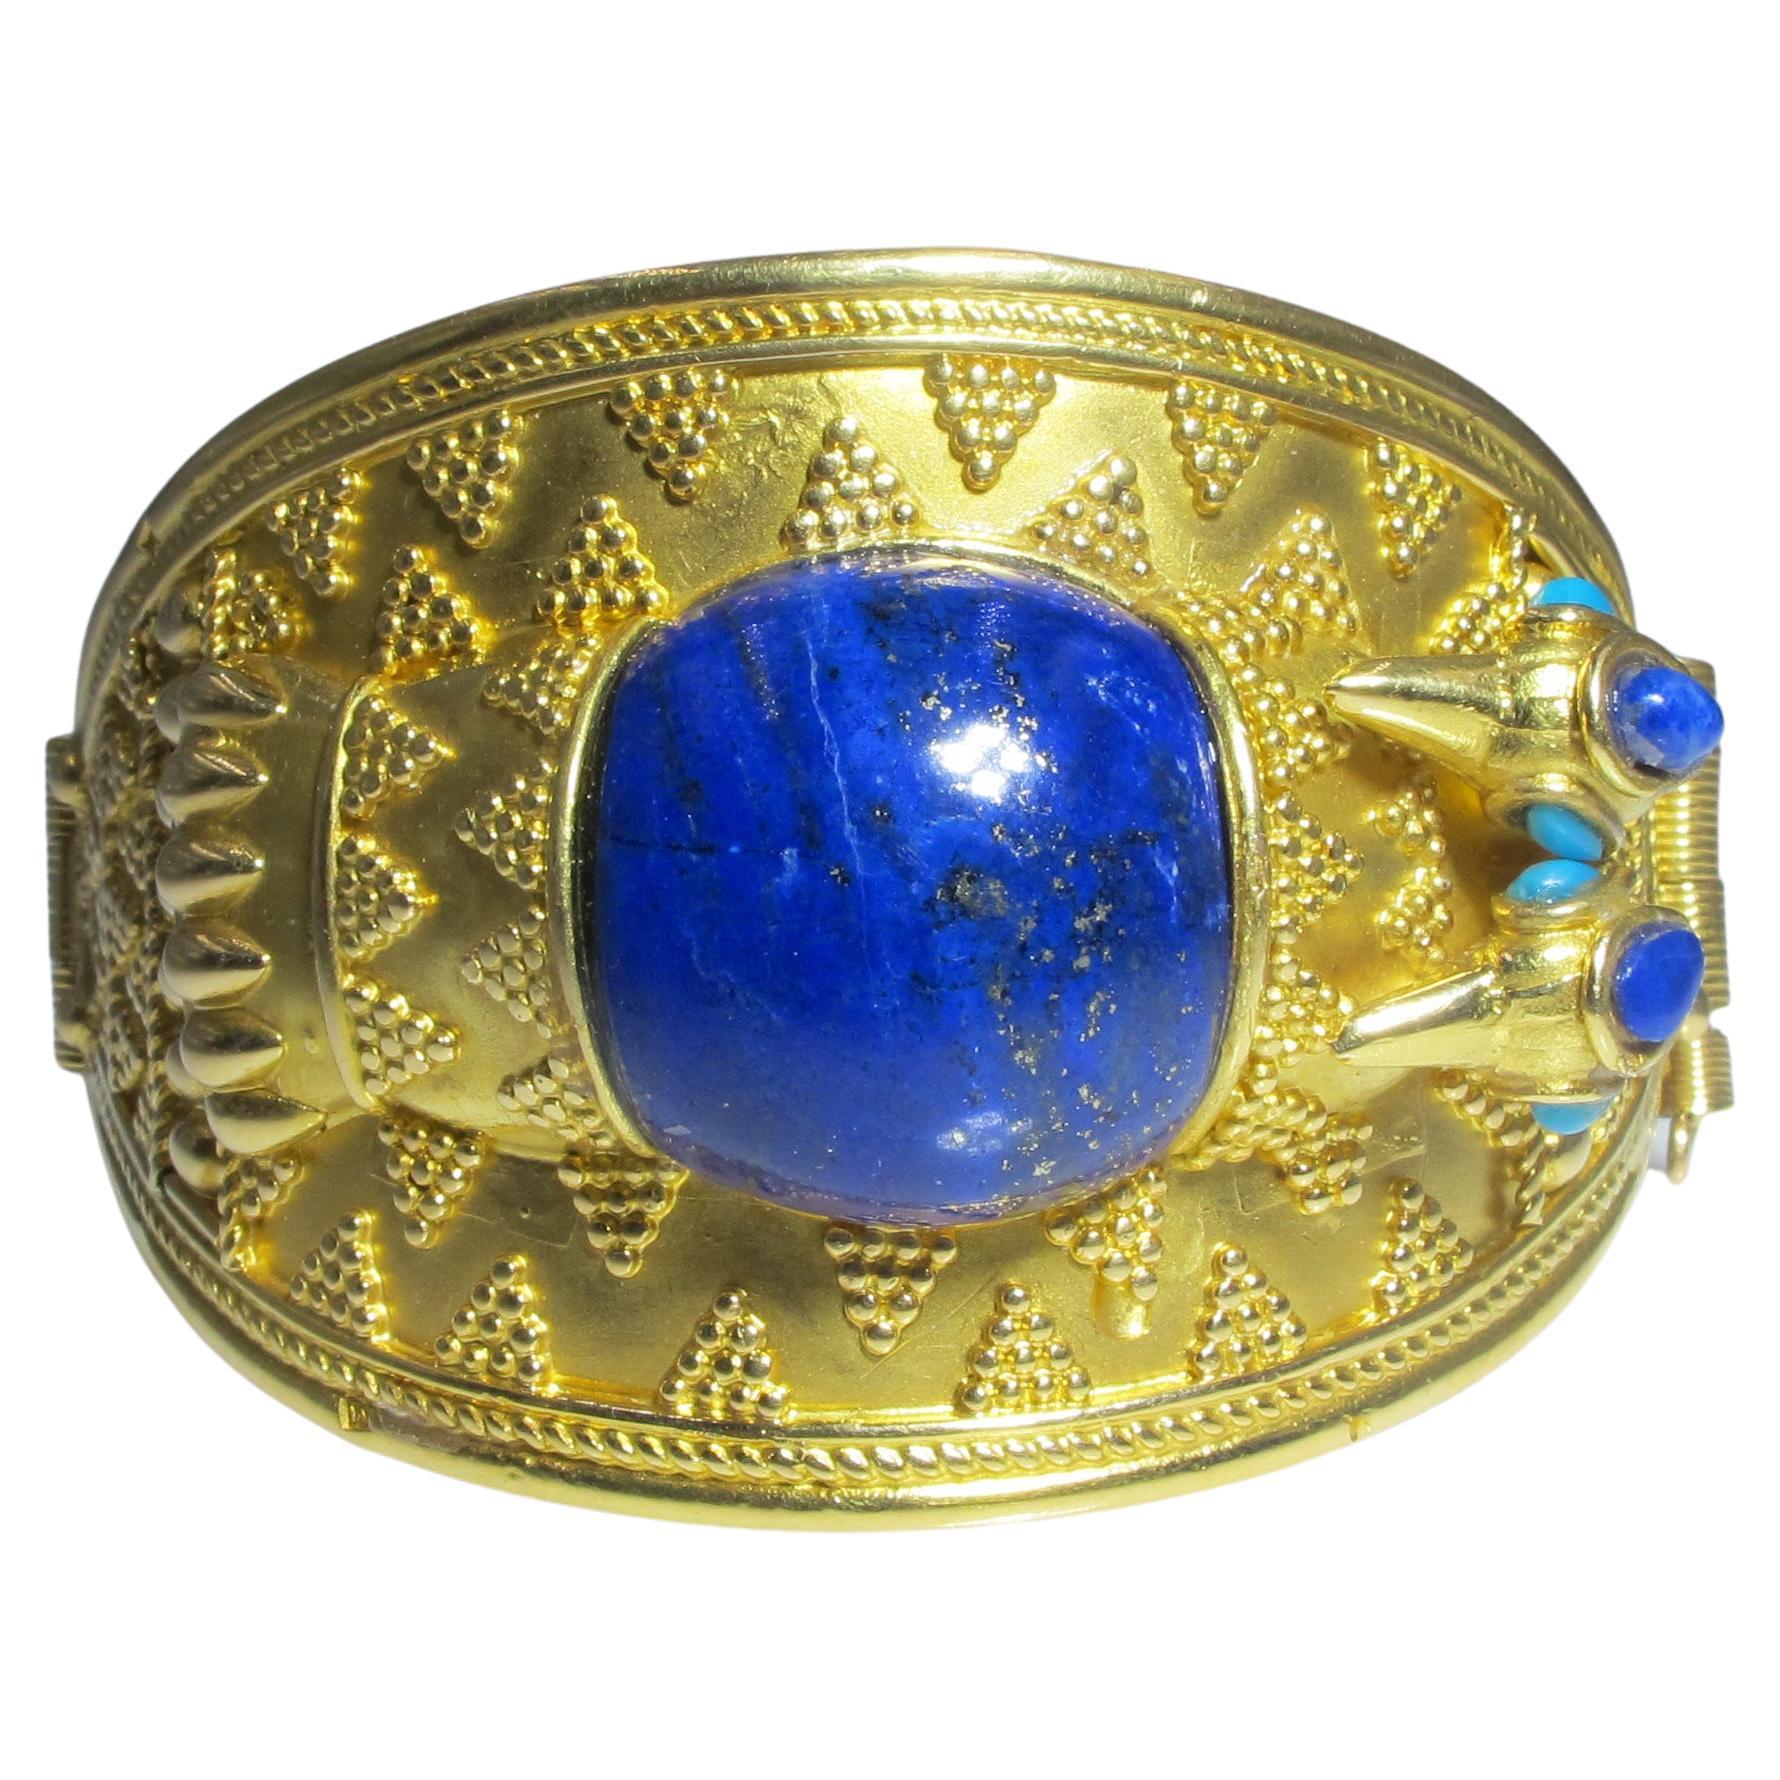 71.08 GR 18KT GOLD HAND CARVED BEETLE DESIGN WITH LAPIS  AND TURQUOISE VERY RARE!
Appraisal Value $11,950+TAX
CENTER STONE: LAPIS CABACHON
SHAPE: HAND CARVED BEETLE DESIGN 
CENTER STONE: APPROXIMATELY 21MM X 21MM AND 2 SMALL LAPIS CABOCHONS 
STONE: